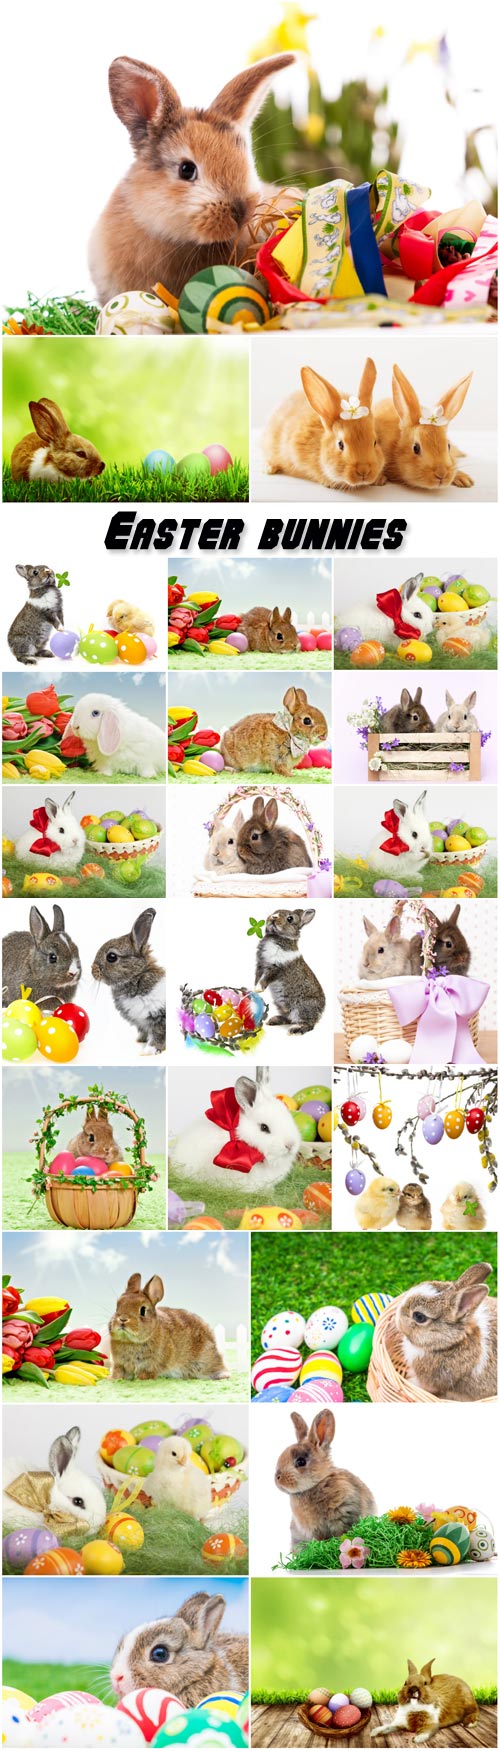 Easter bunnies, chicks, spring backgrounds